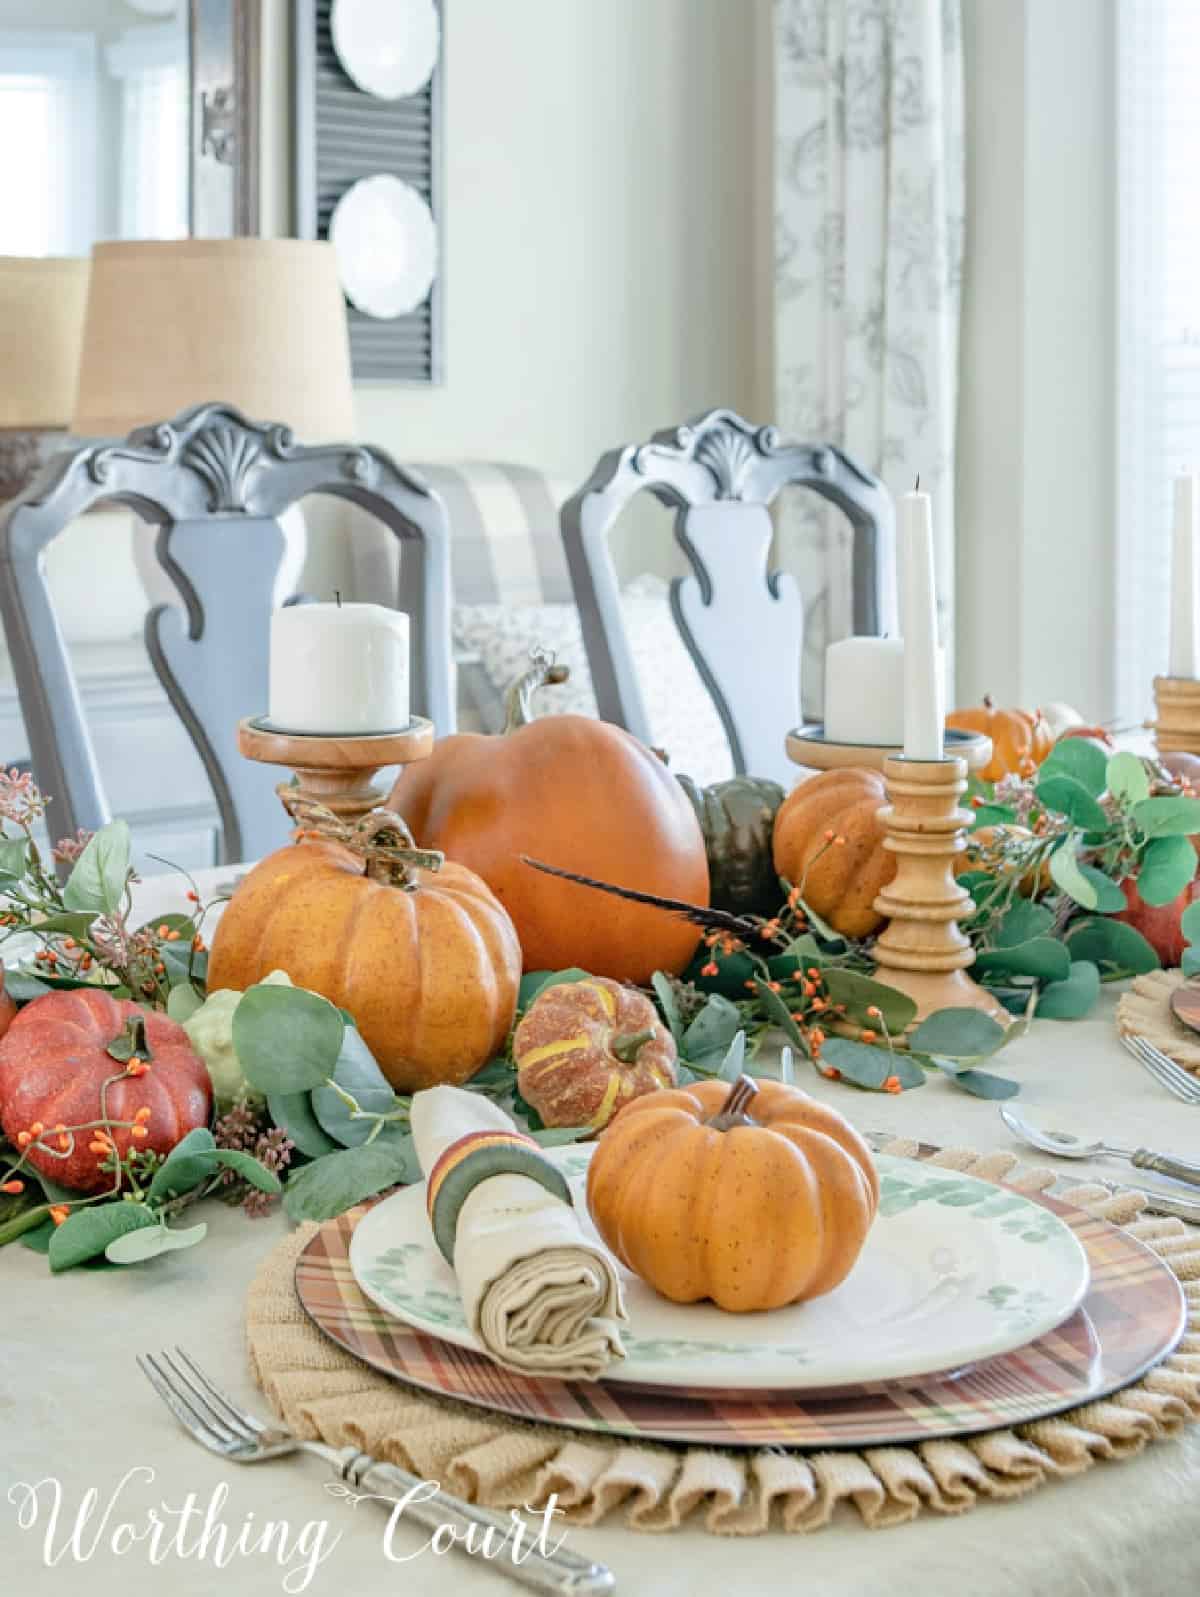 Thanksgiving Countdown – 8 Smart Things You Should Do Right Now To Get Ready